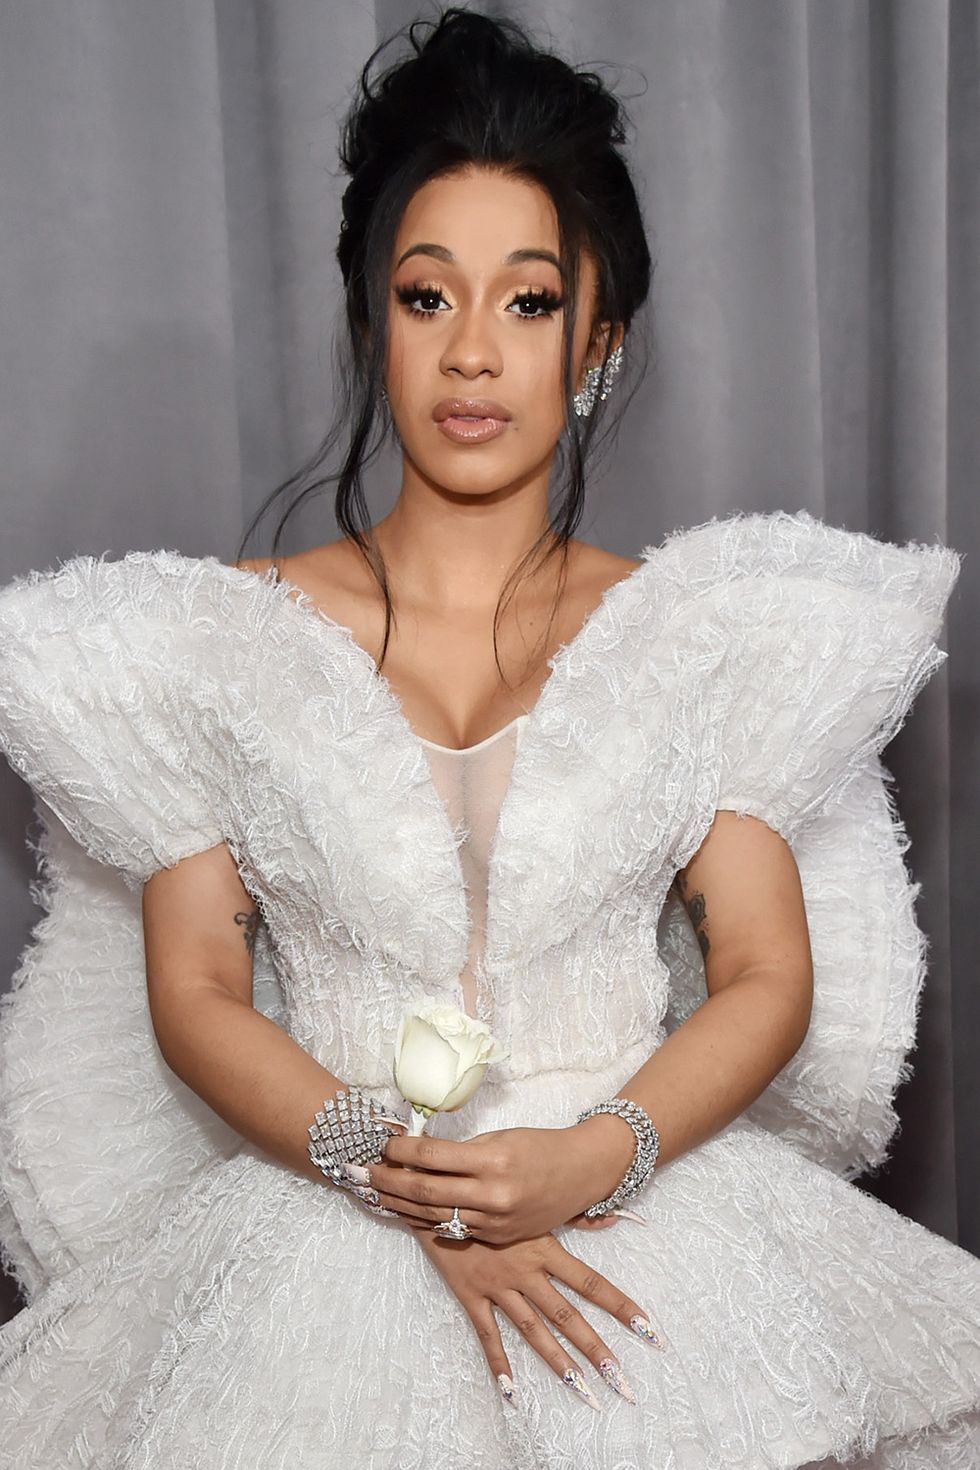 Cardi B Thinks About How Much Money She'd Make As A Stripper Today